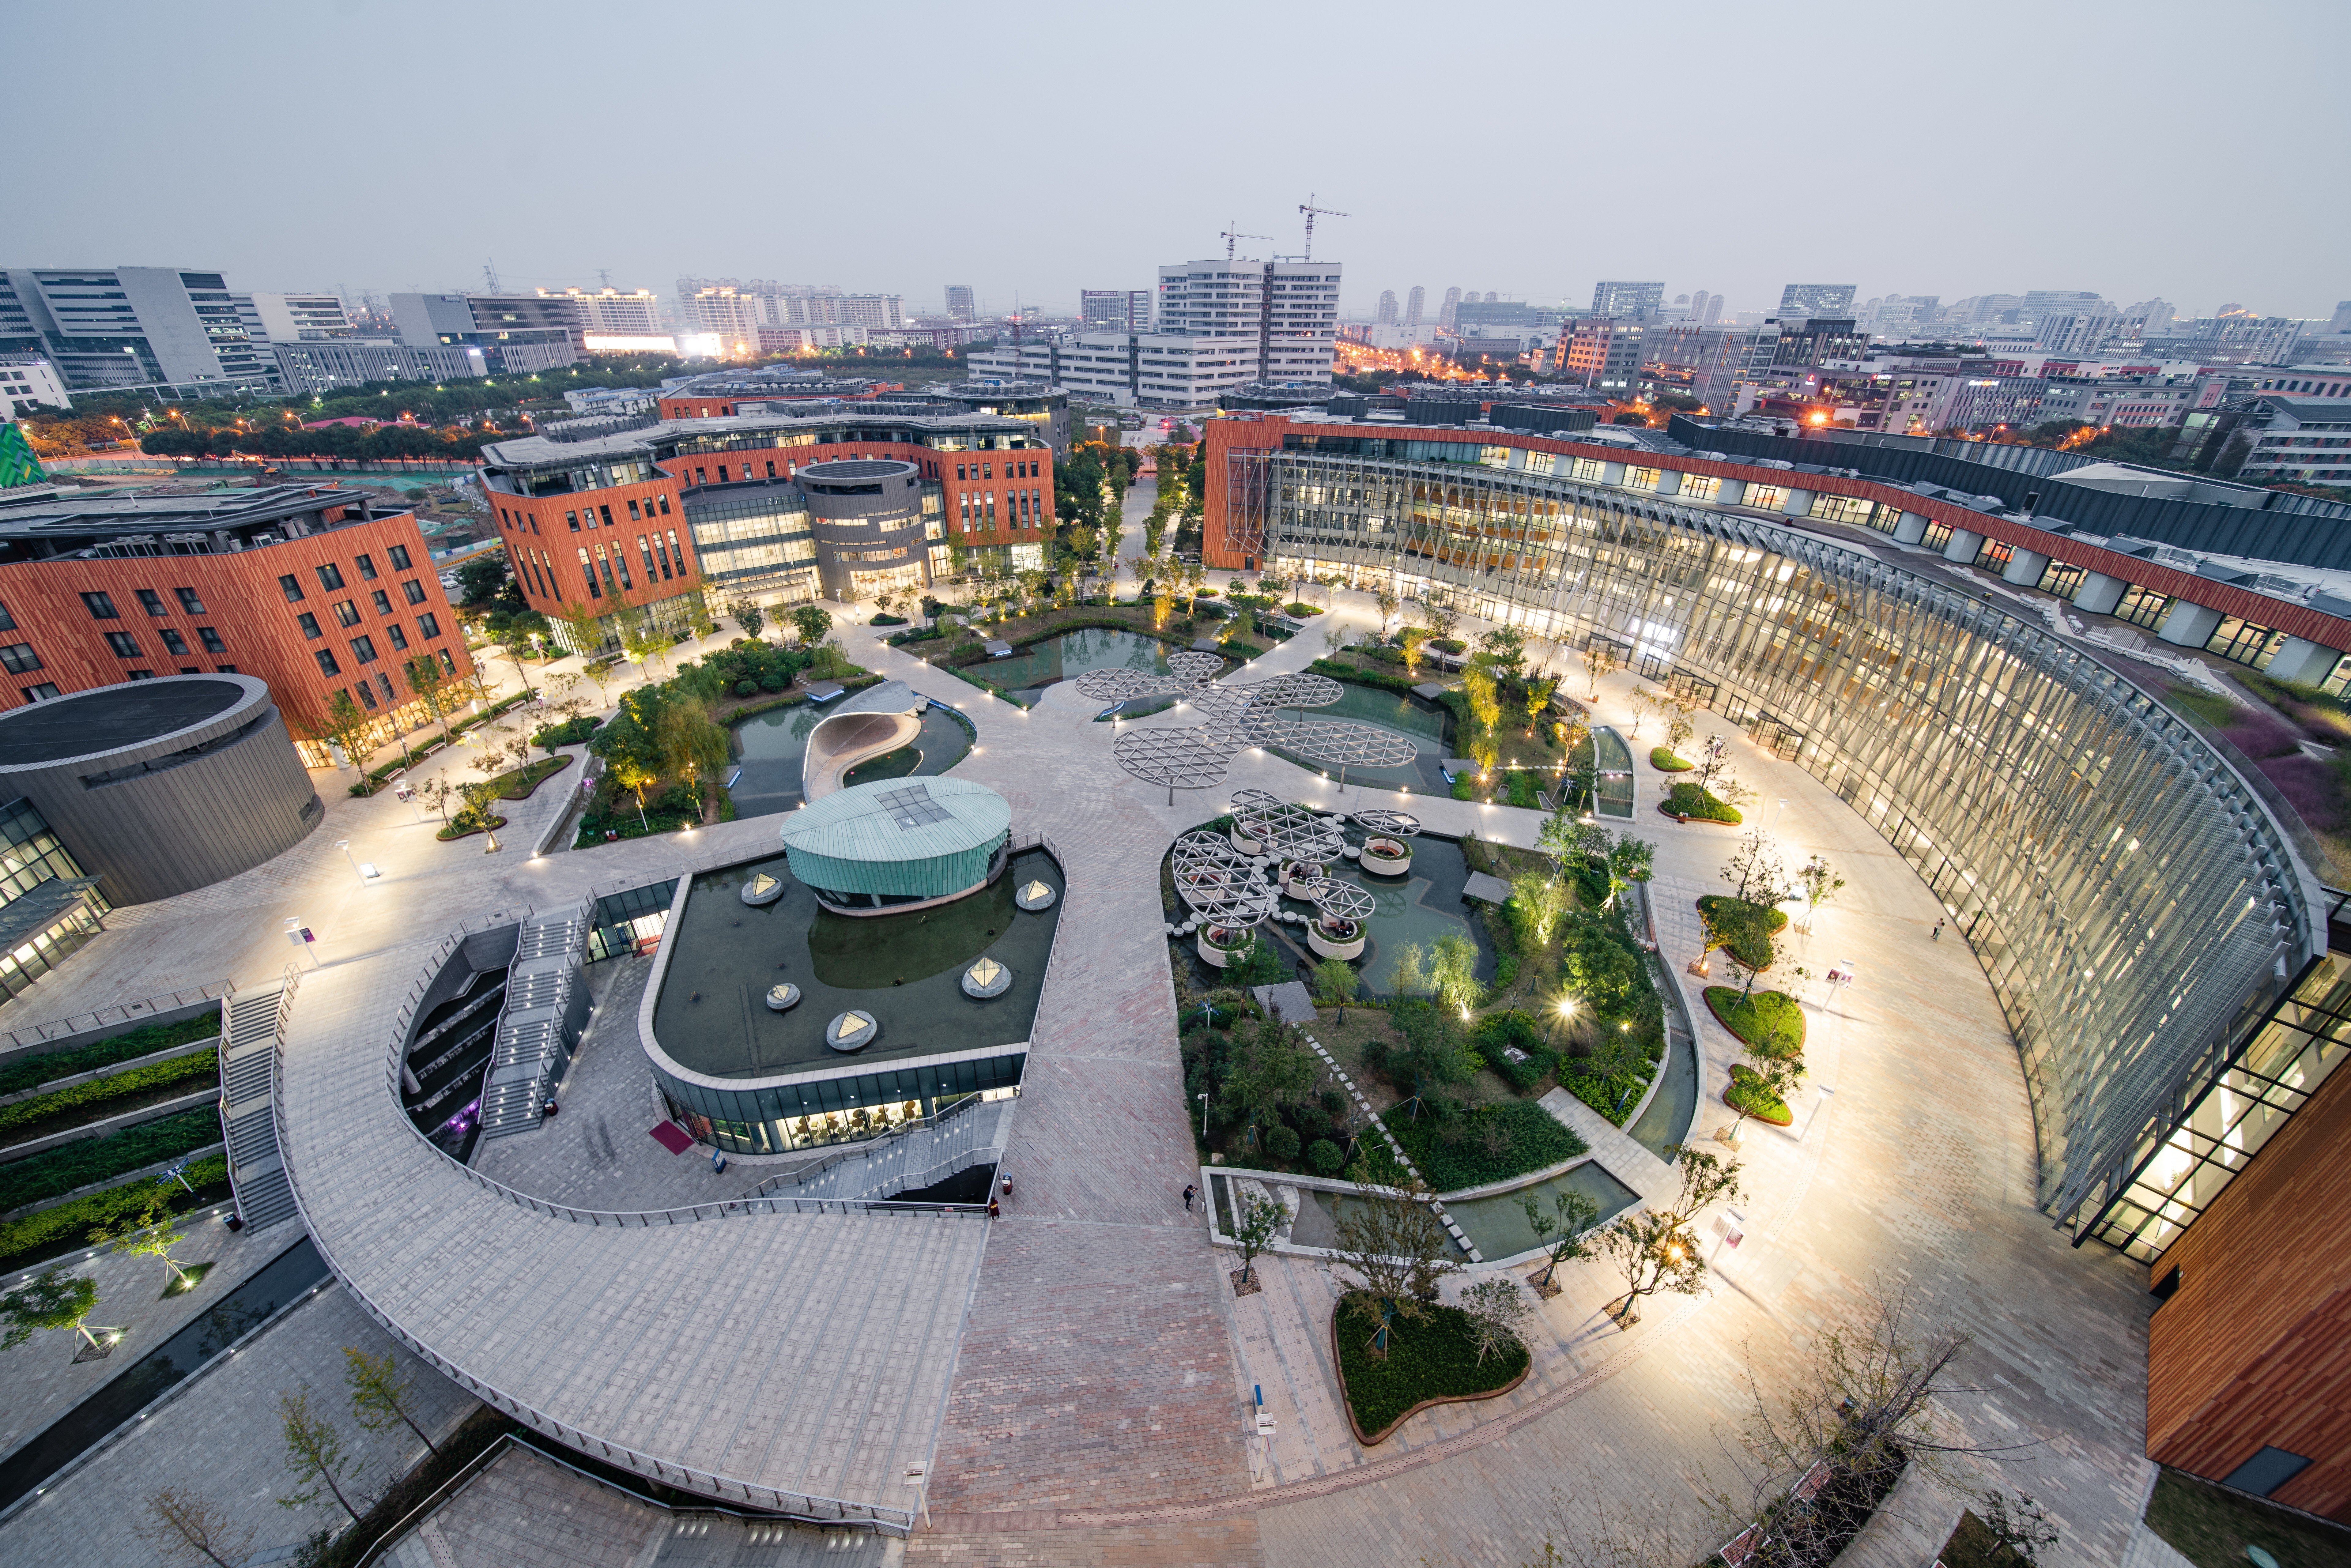 Xi’an Jiaotong-Liverpool University in Suzhou, China, was founded as a partnership between the University of Liverpool, in the United Kingdom, and China’s Xi’an Jiaotong University, in Xi’an, Shaanxi province.